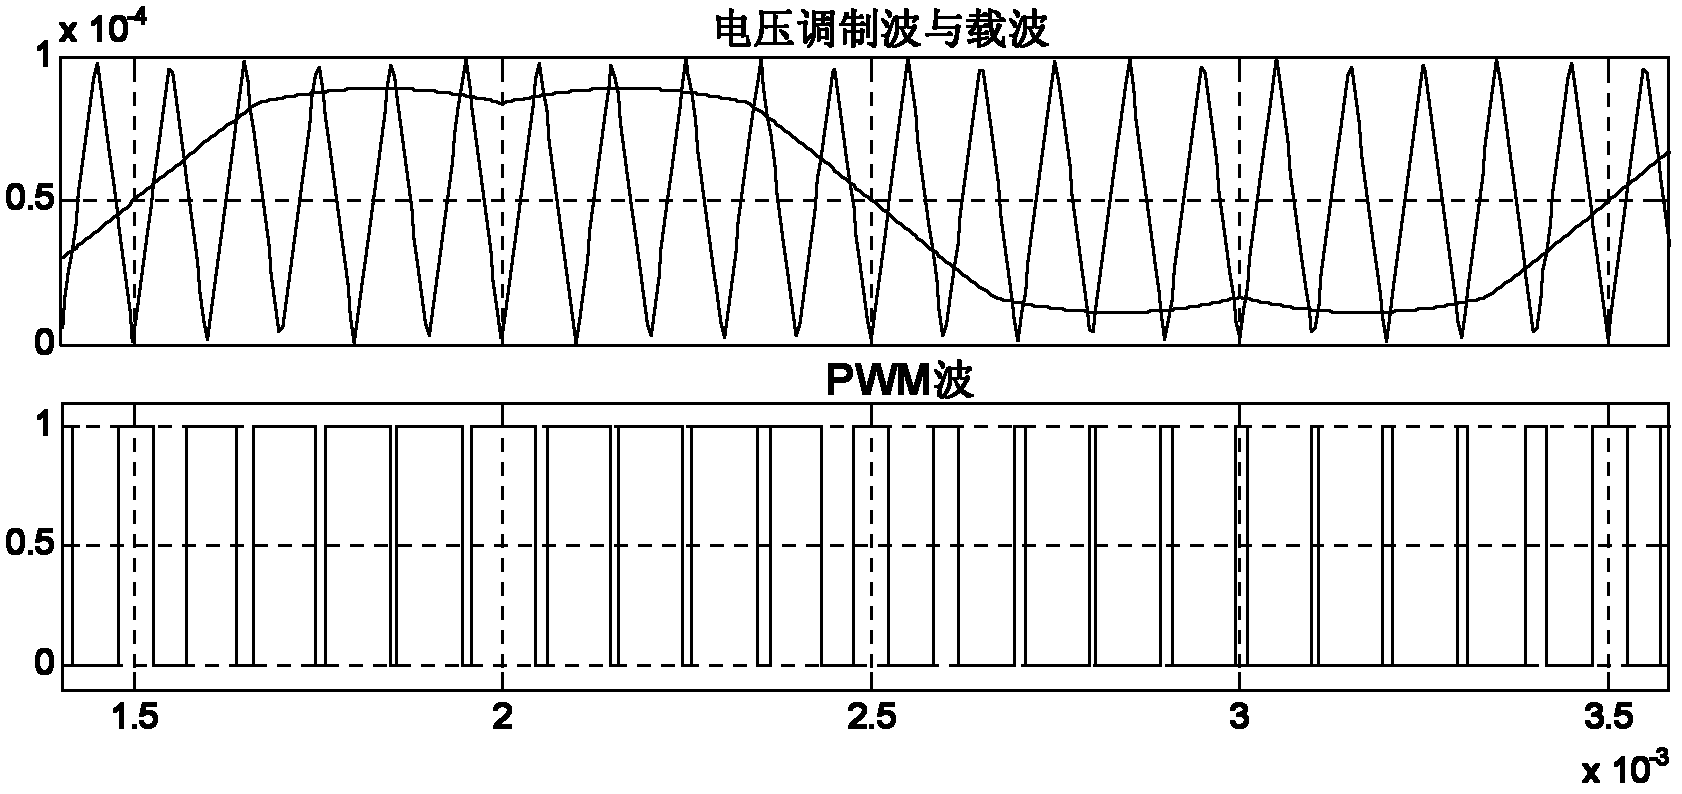 Method for reducing loss of electromobile vehicle-mounted inverter and improving current output capacity of electromobile vehicle-mounted inverter